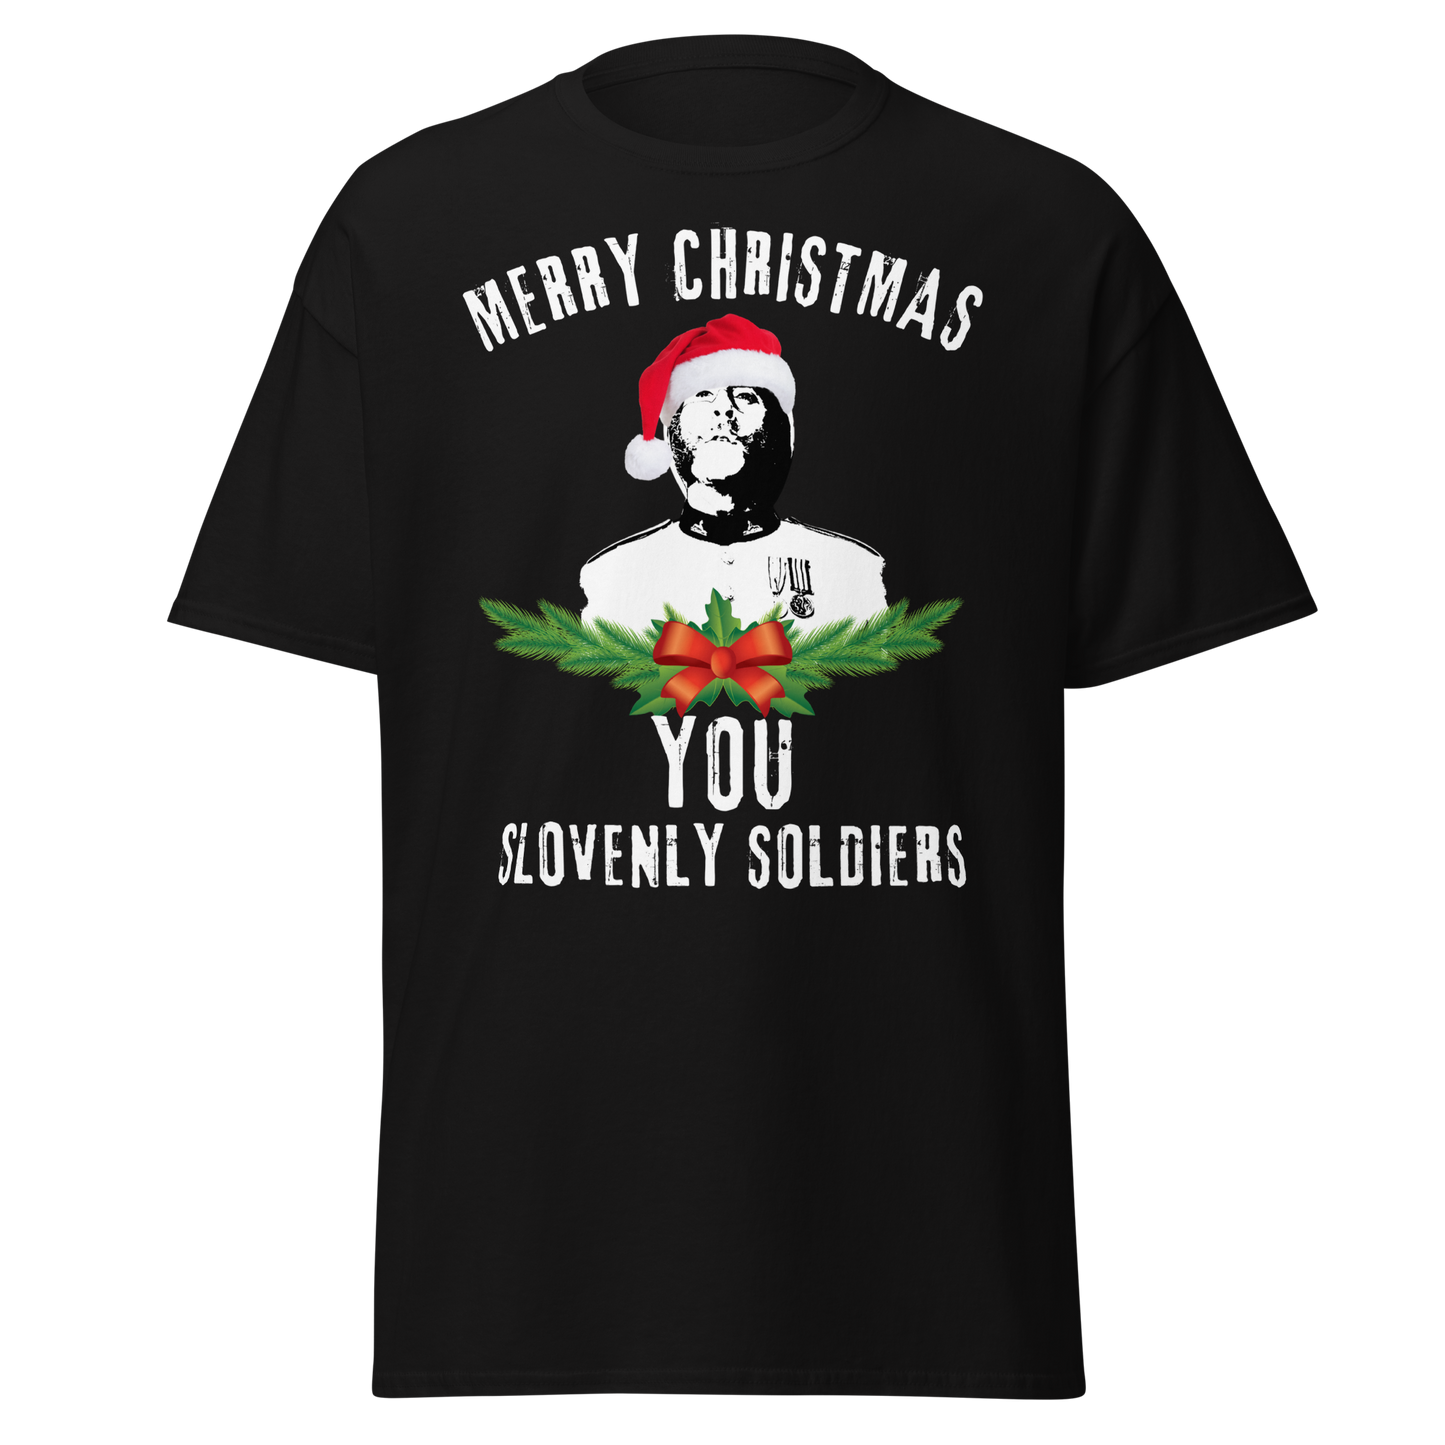 Merry Christmas You Slovenly Soldiers (Festive t-shirt)